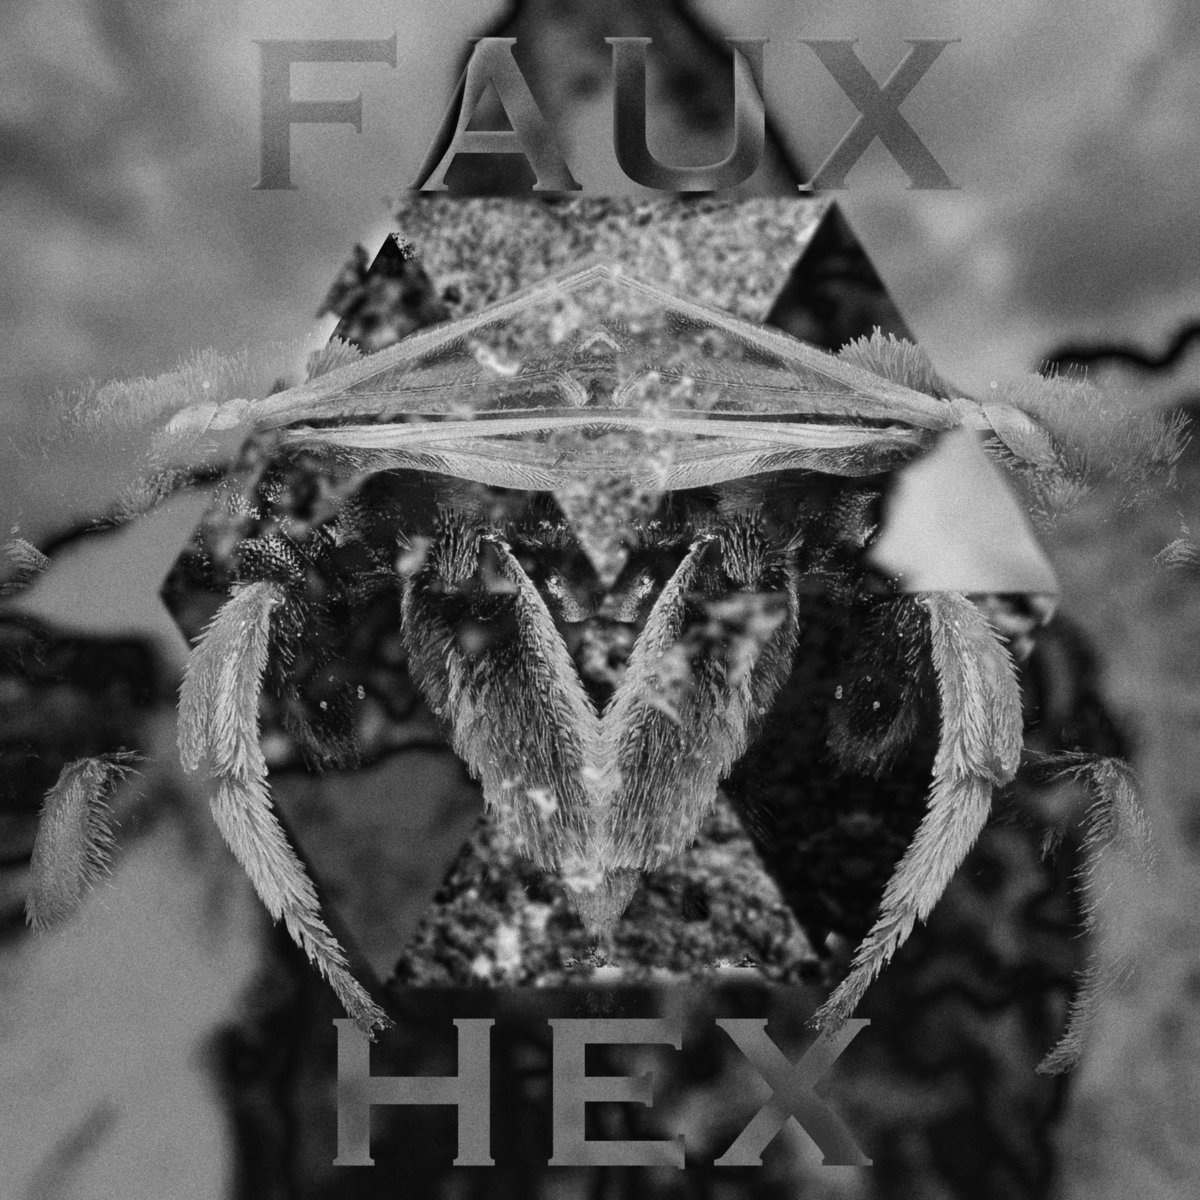 DEBUT ALBUM REVIEW: “The Body and All Its Positions” by Faux Hex